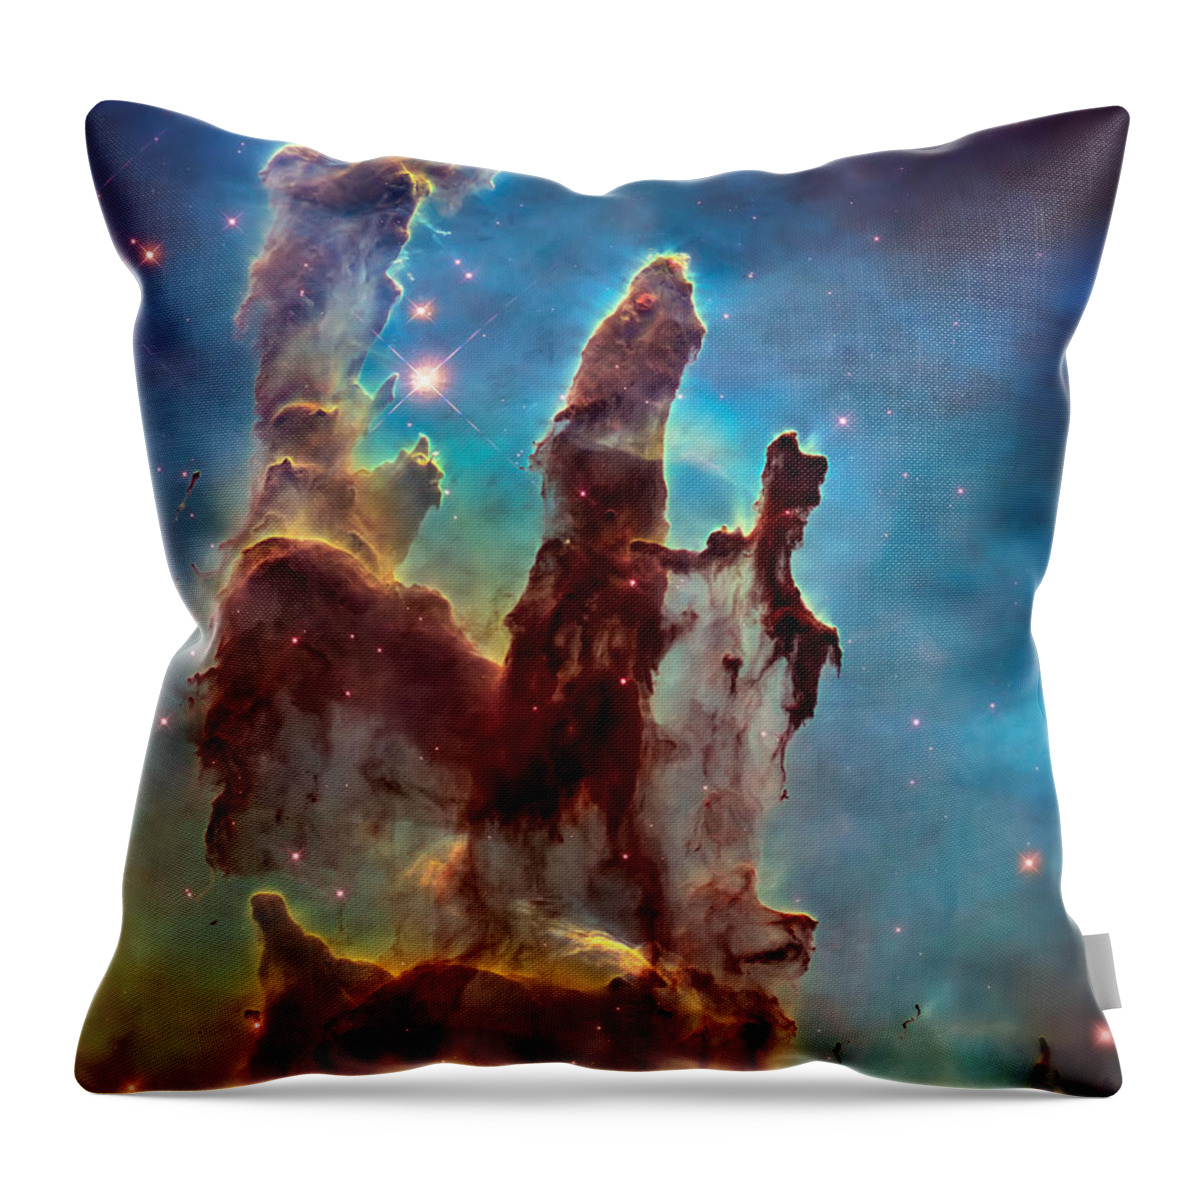 Pillars Of Creation Throw Pillow featuring the photograph Pillars of Creation in High Definition Cropped by Jennifer Rondinelli Reilly - Fine Art Photography